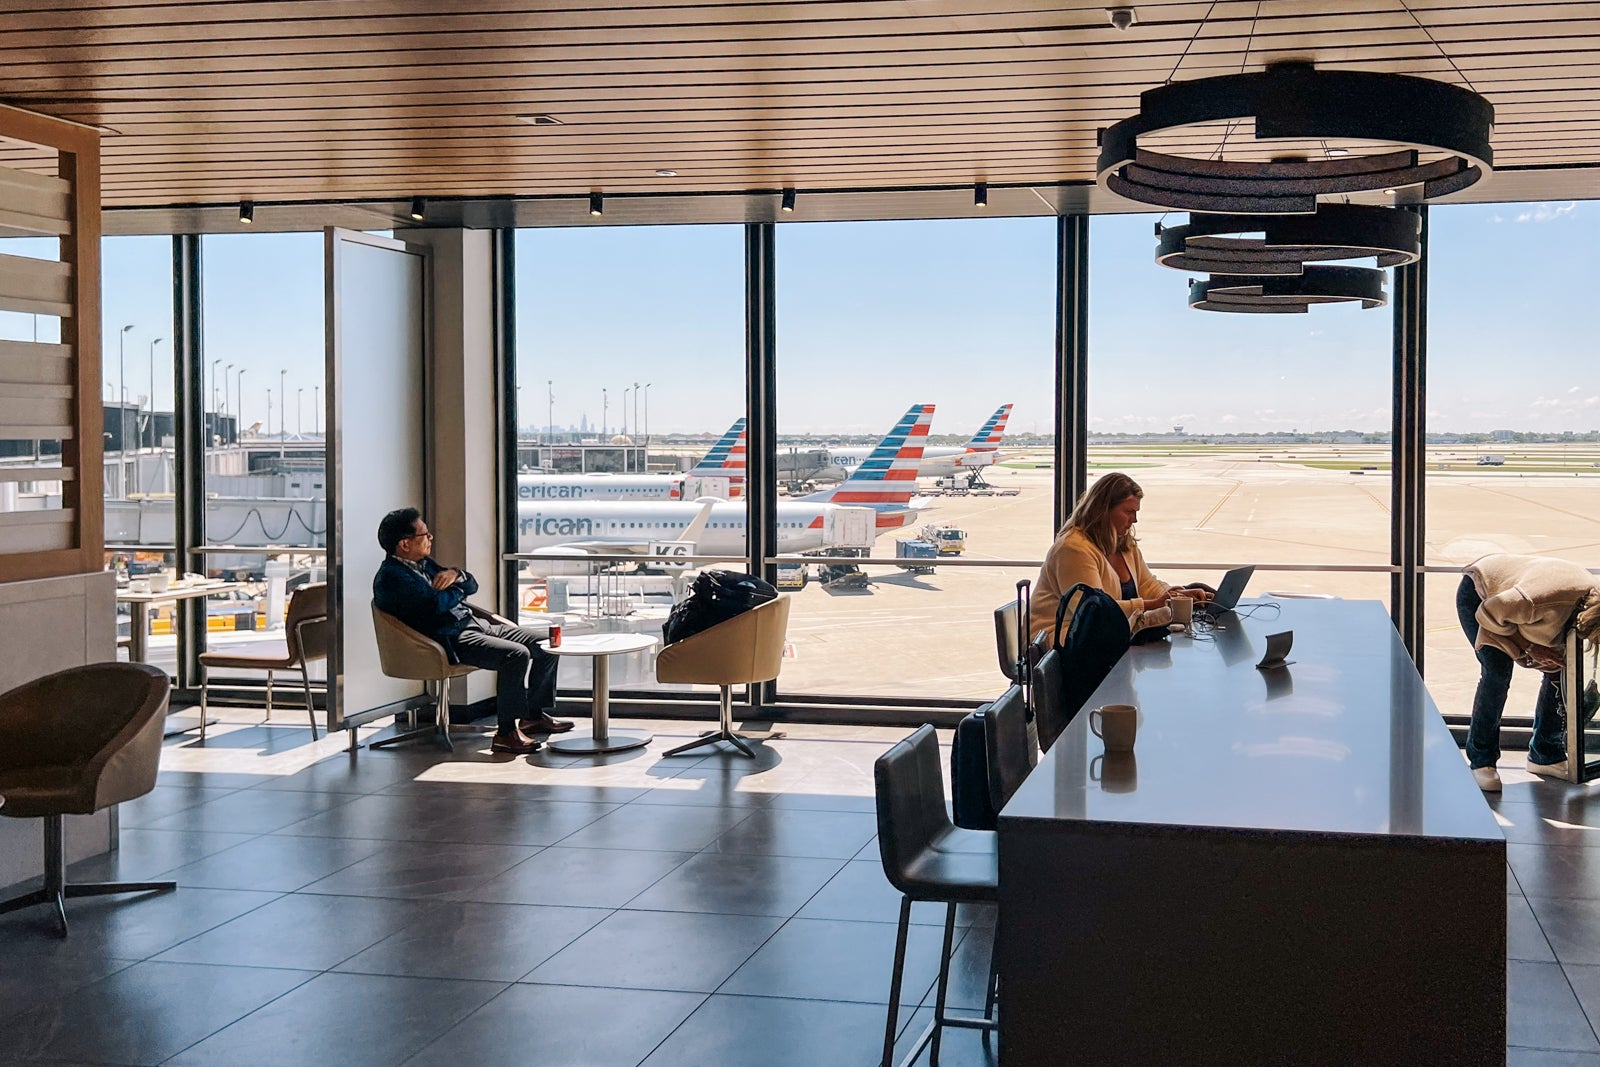 American Airlines Flagship Lounge at Chicago's O"Hare International Airport (ORD)